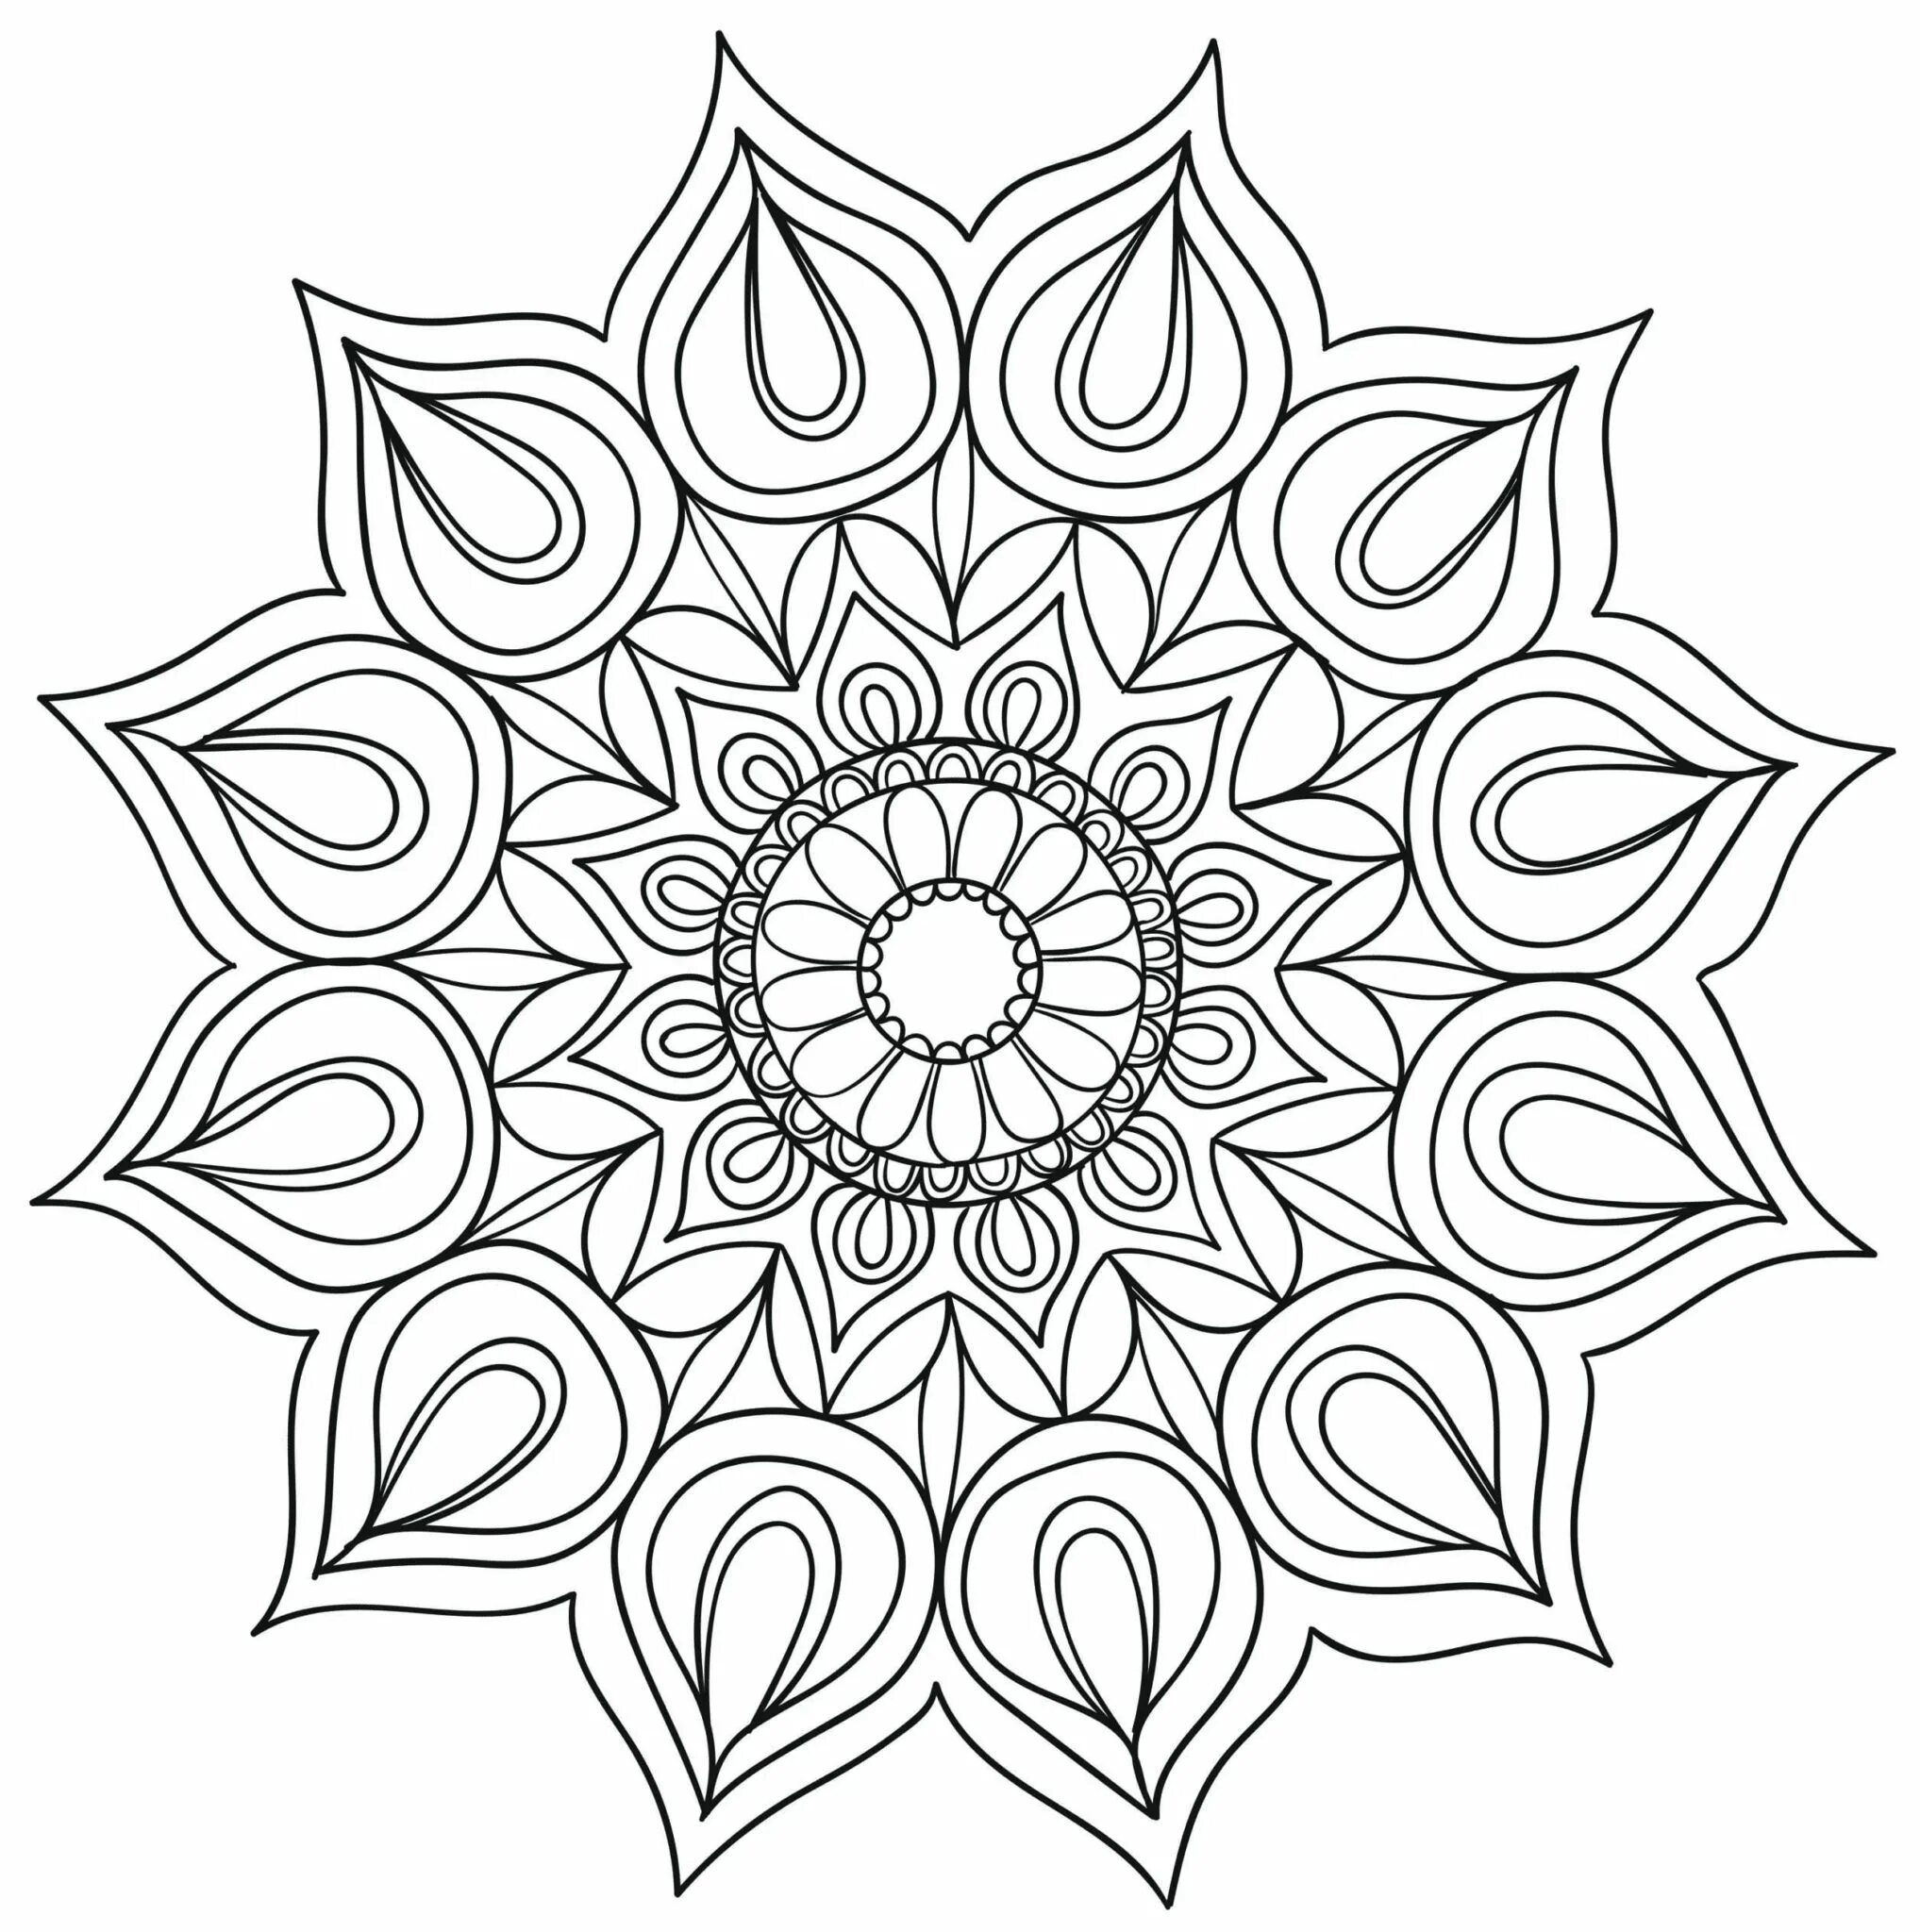 Creative mantra coloring pages